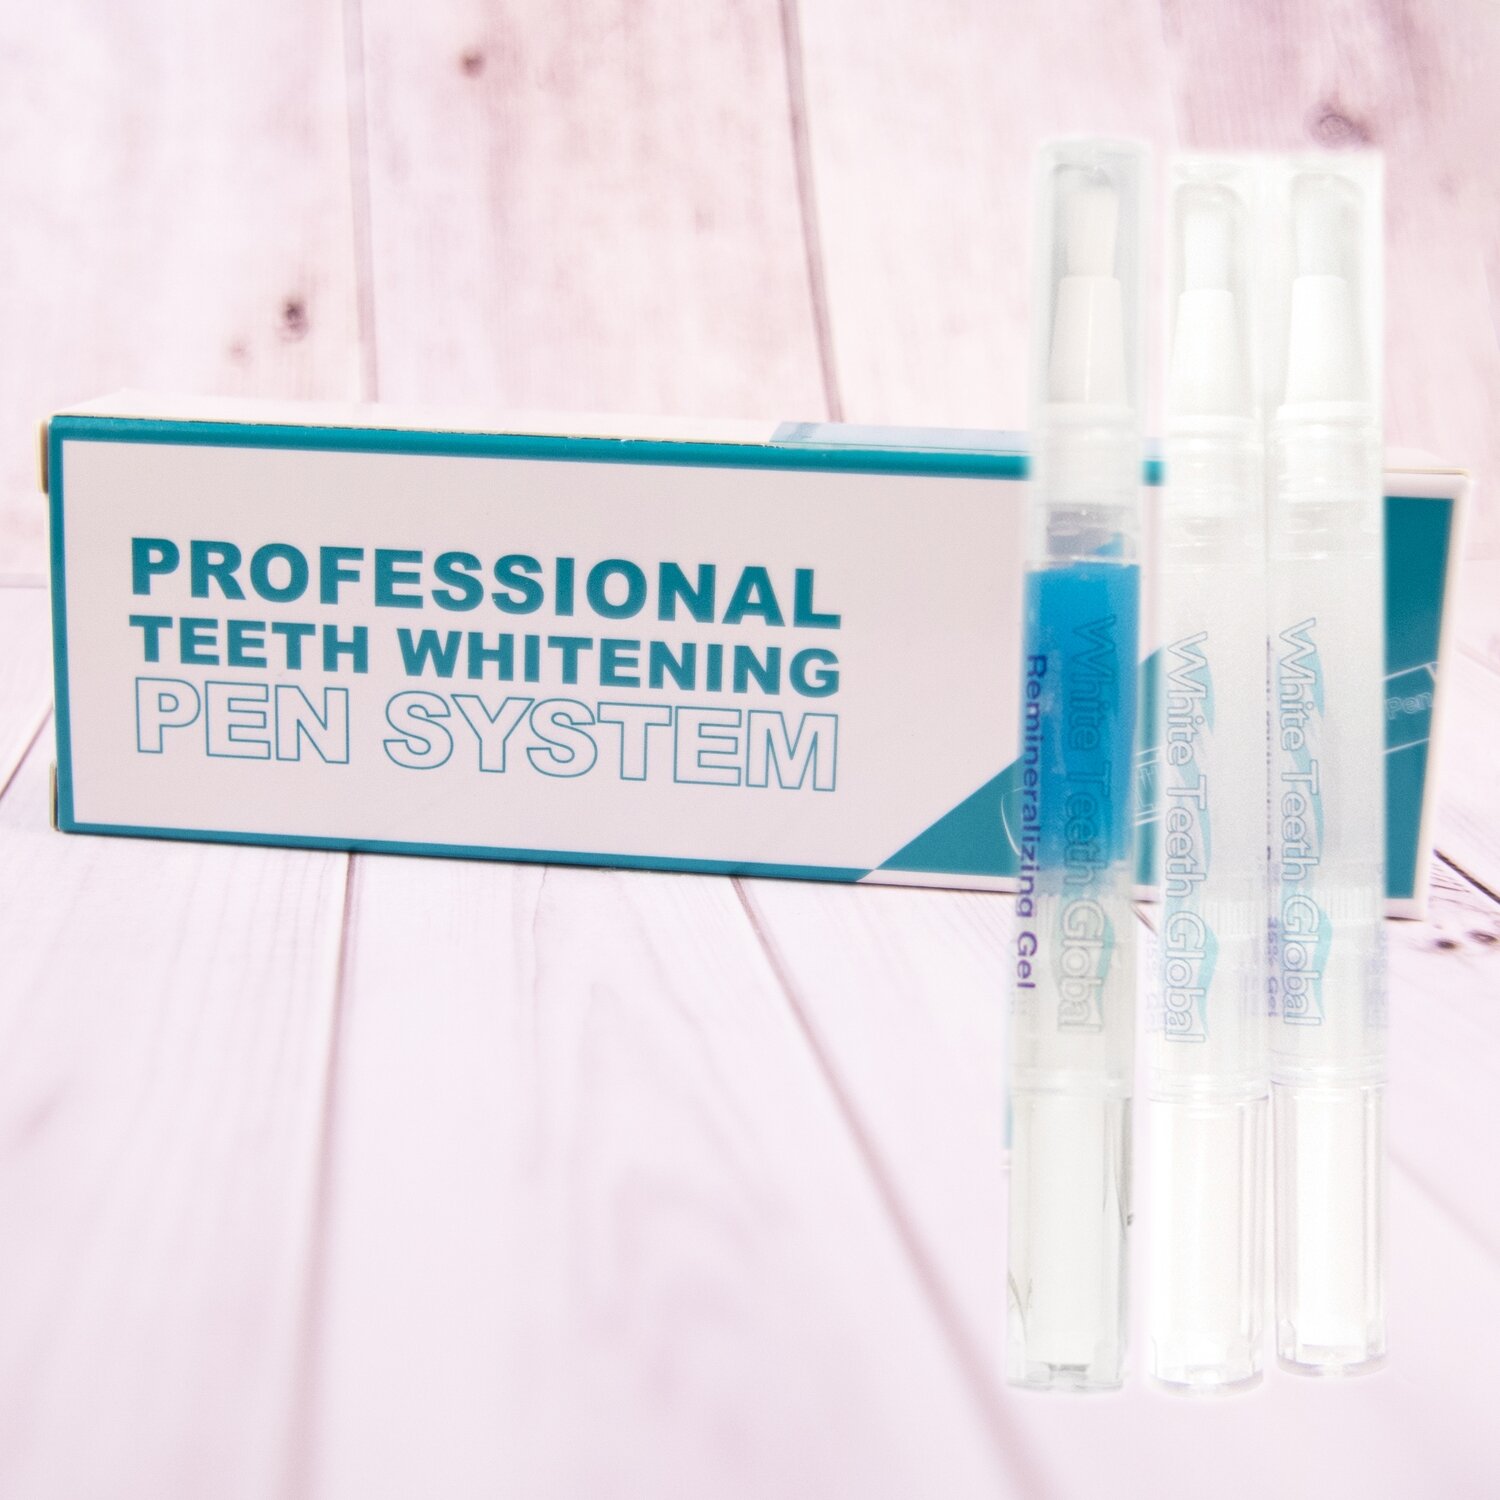 3 Teeth Whitening Pens Box with 2